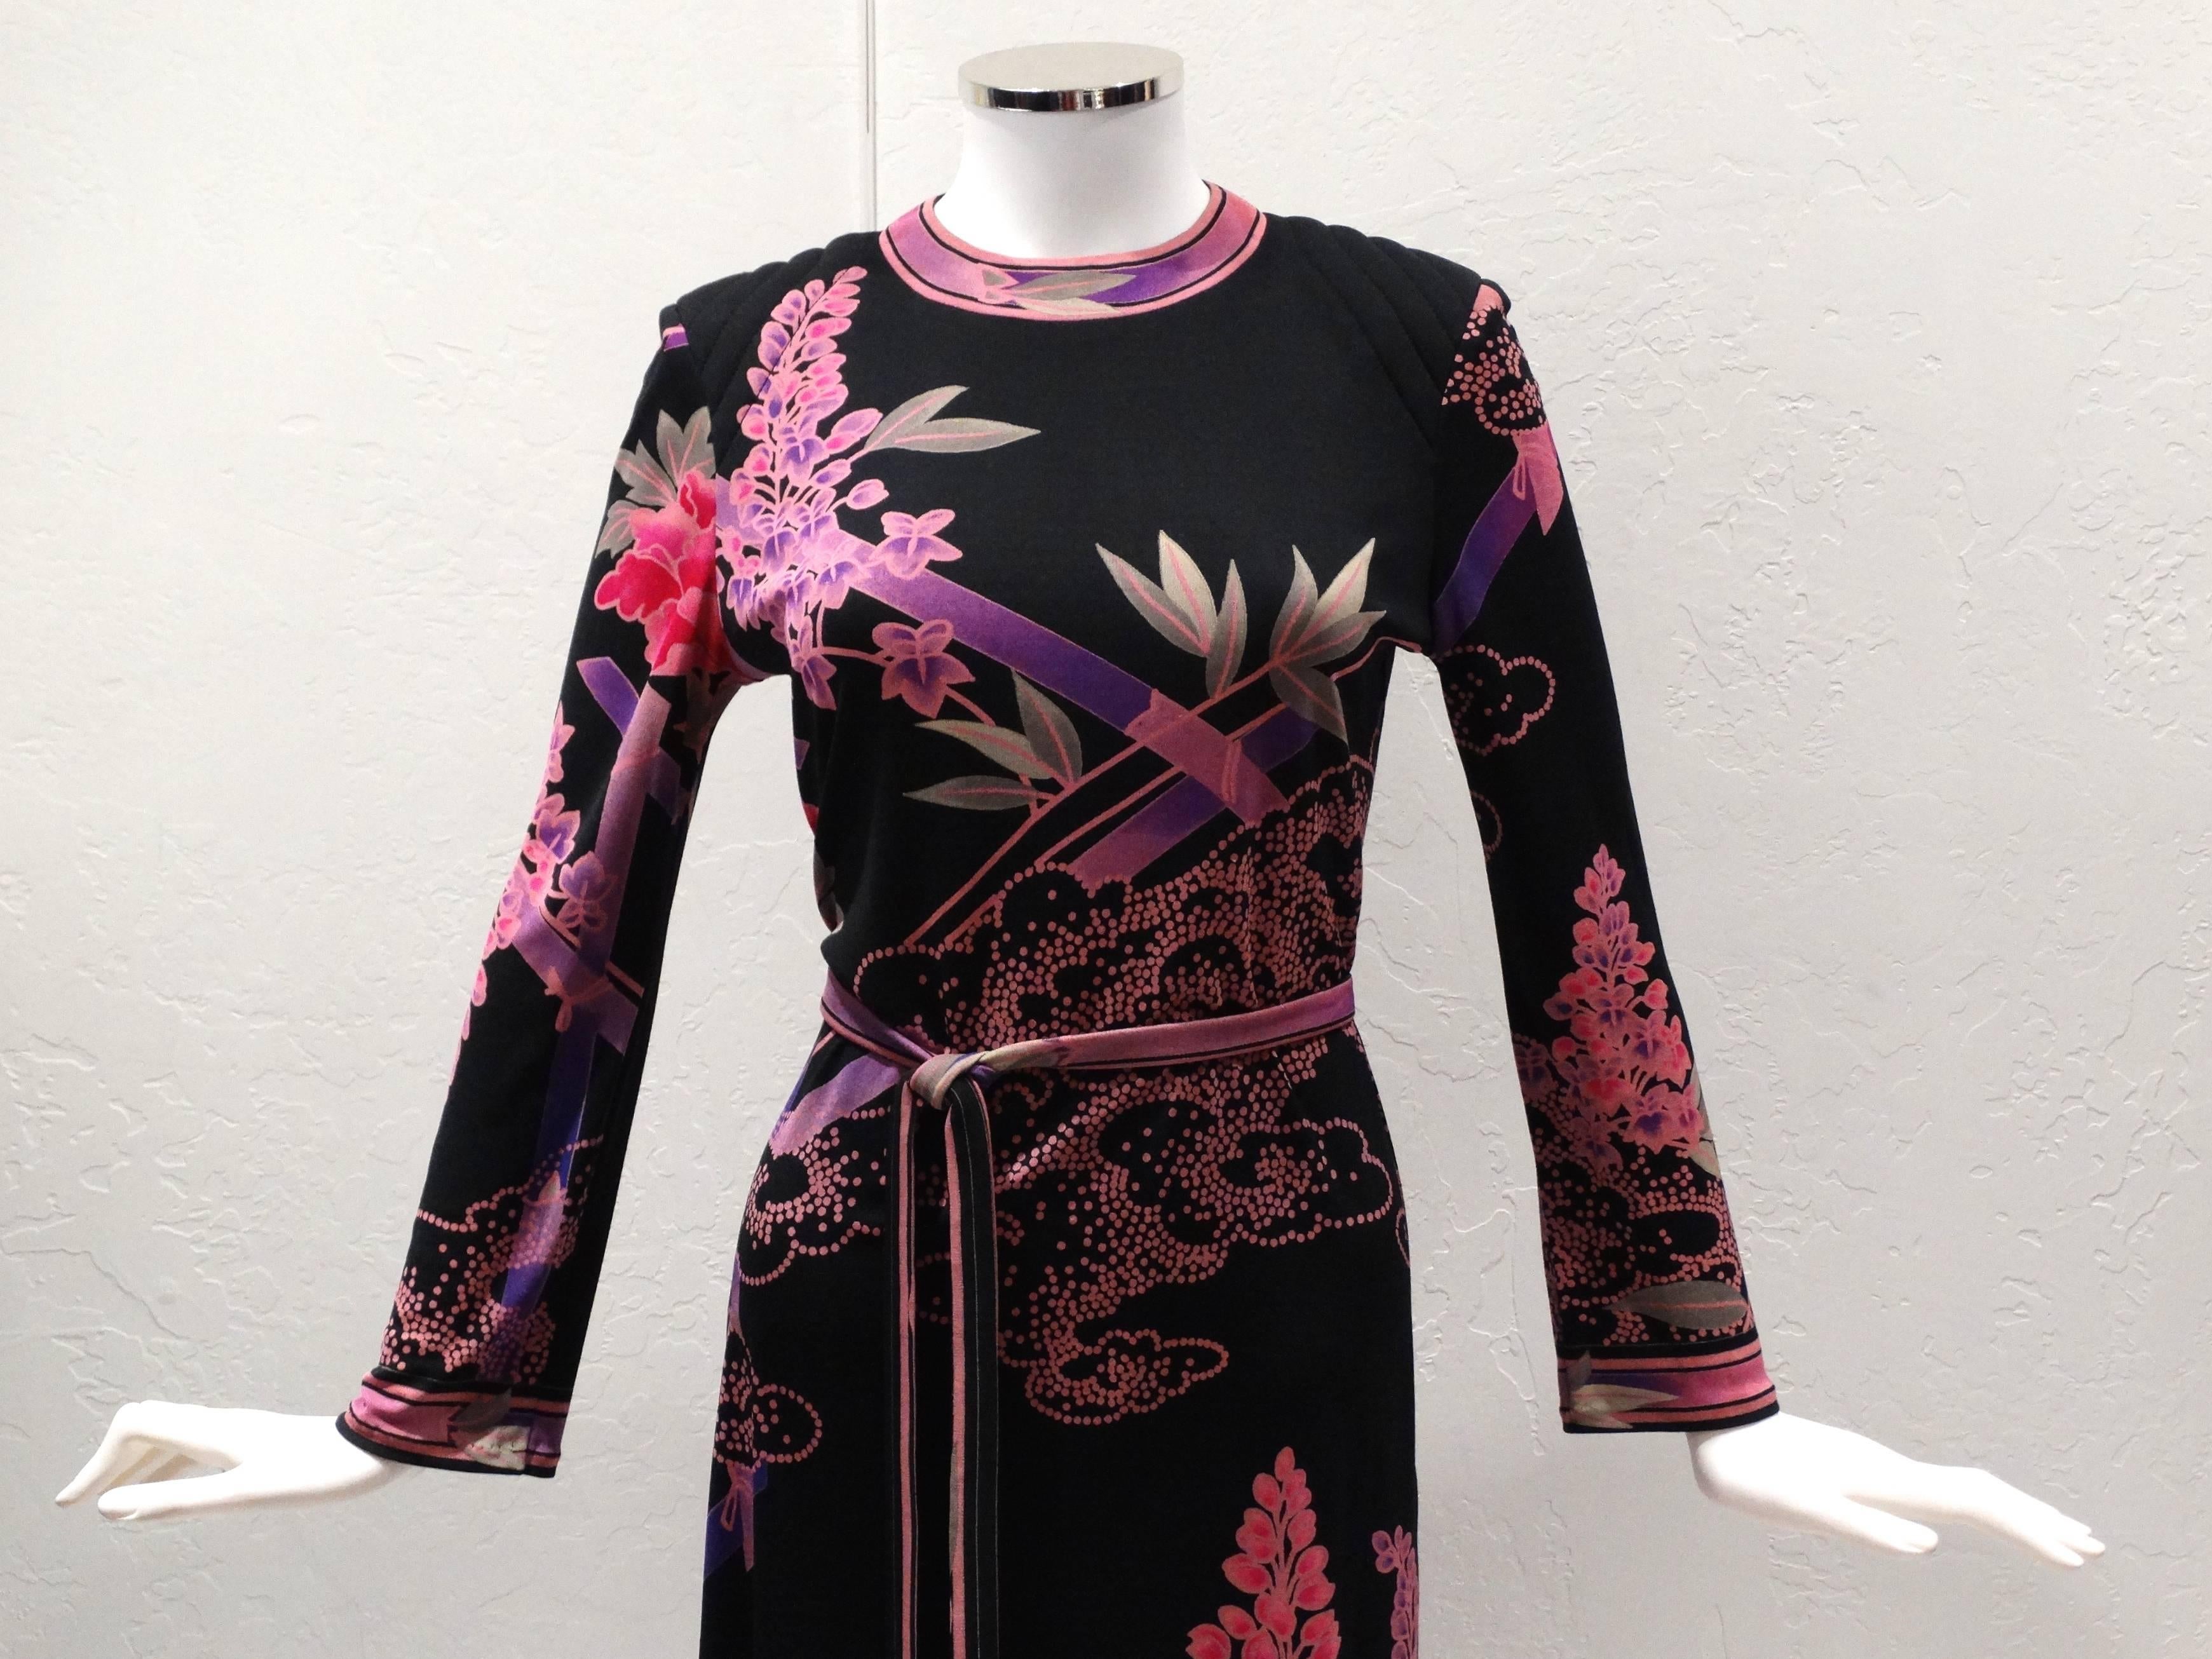 A beautiful 1970s Leonard Asian motif printed dress with matching belt with gold tassels at the end. In pinks, black, gray and purple. The dress is silk jersey featuring a round neck, long sleeves, a belted waist and a mid-length. Signed Leonard on